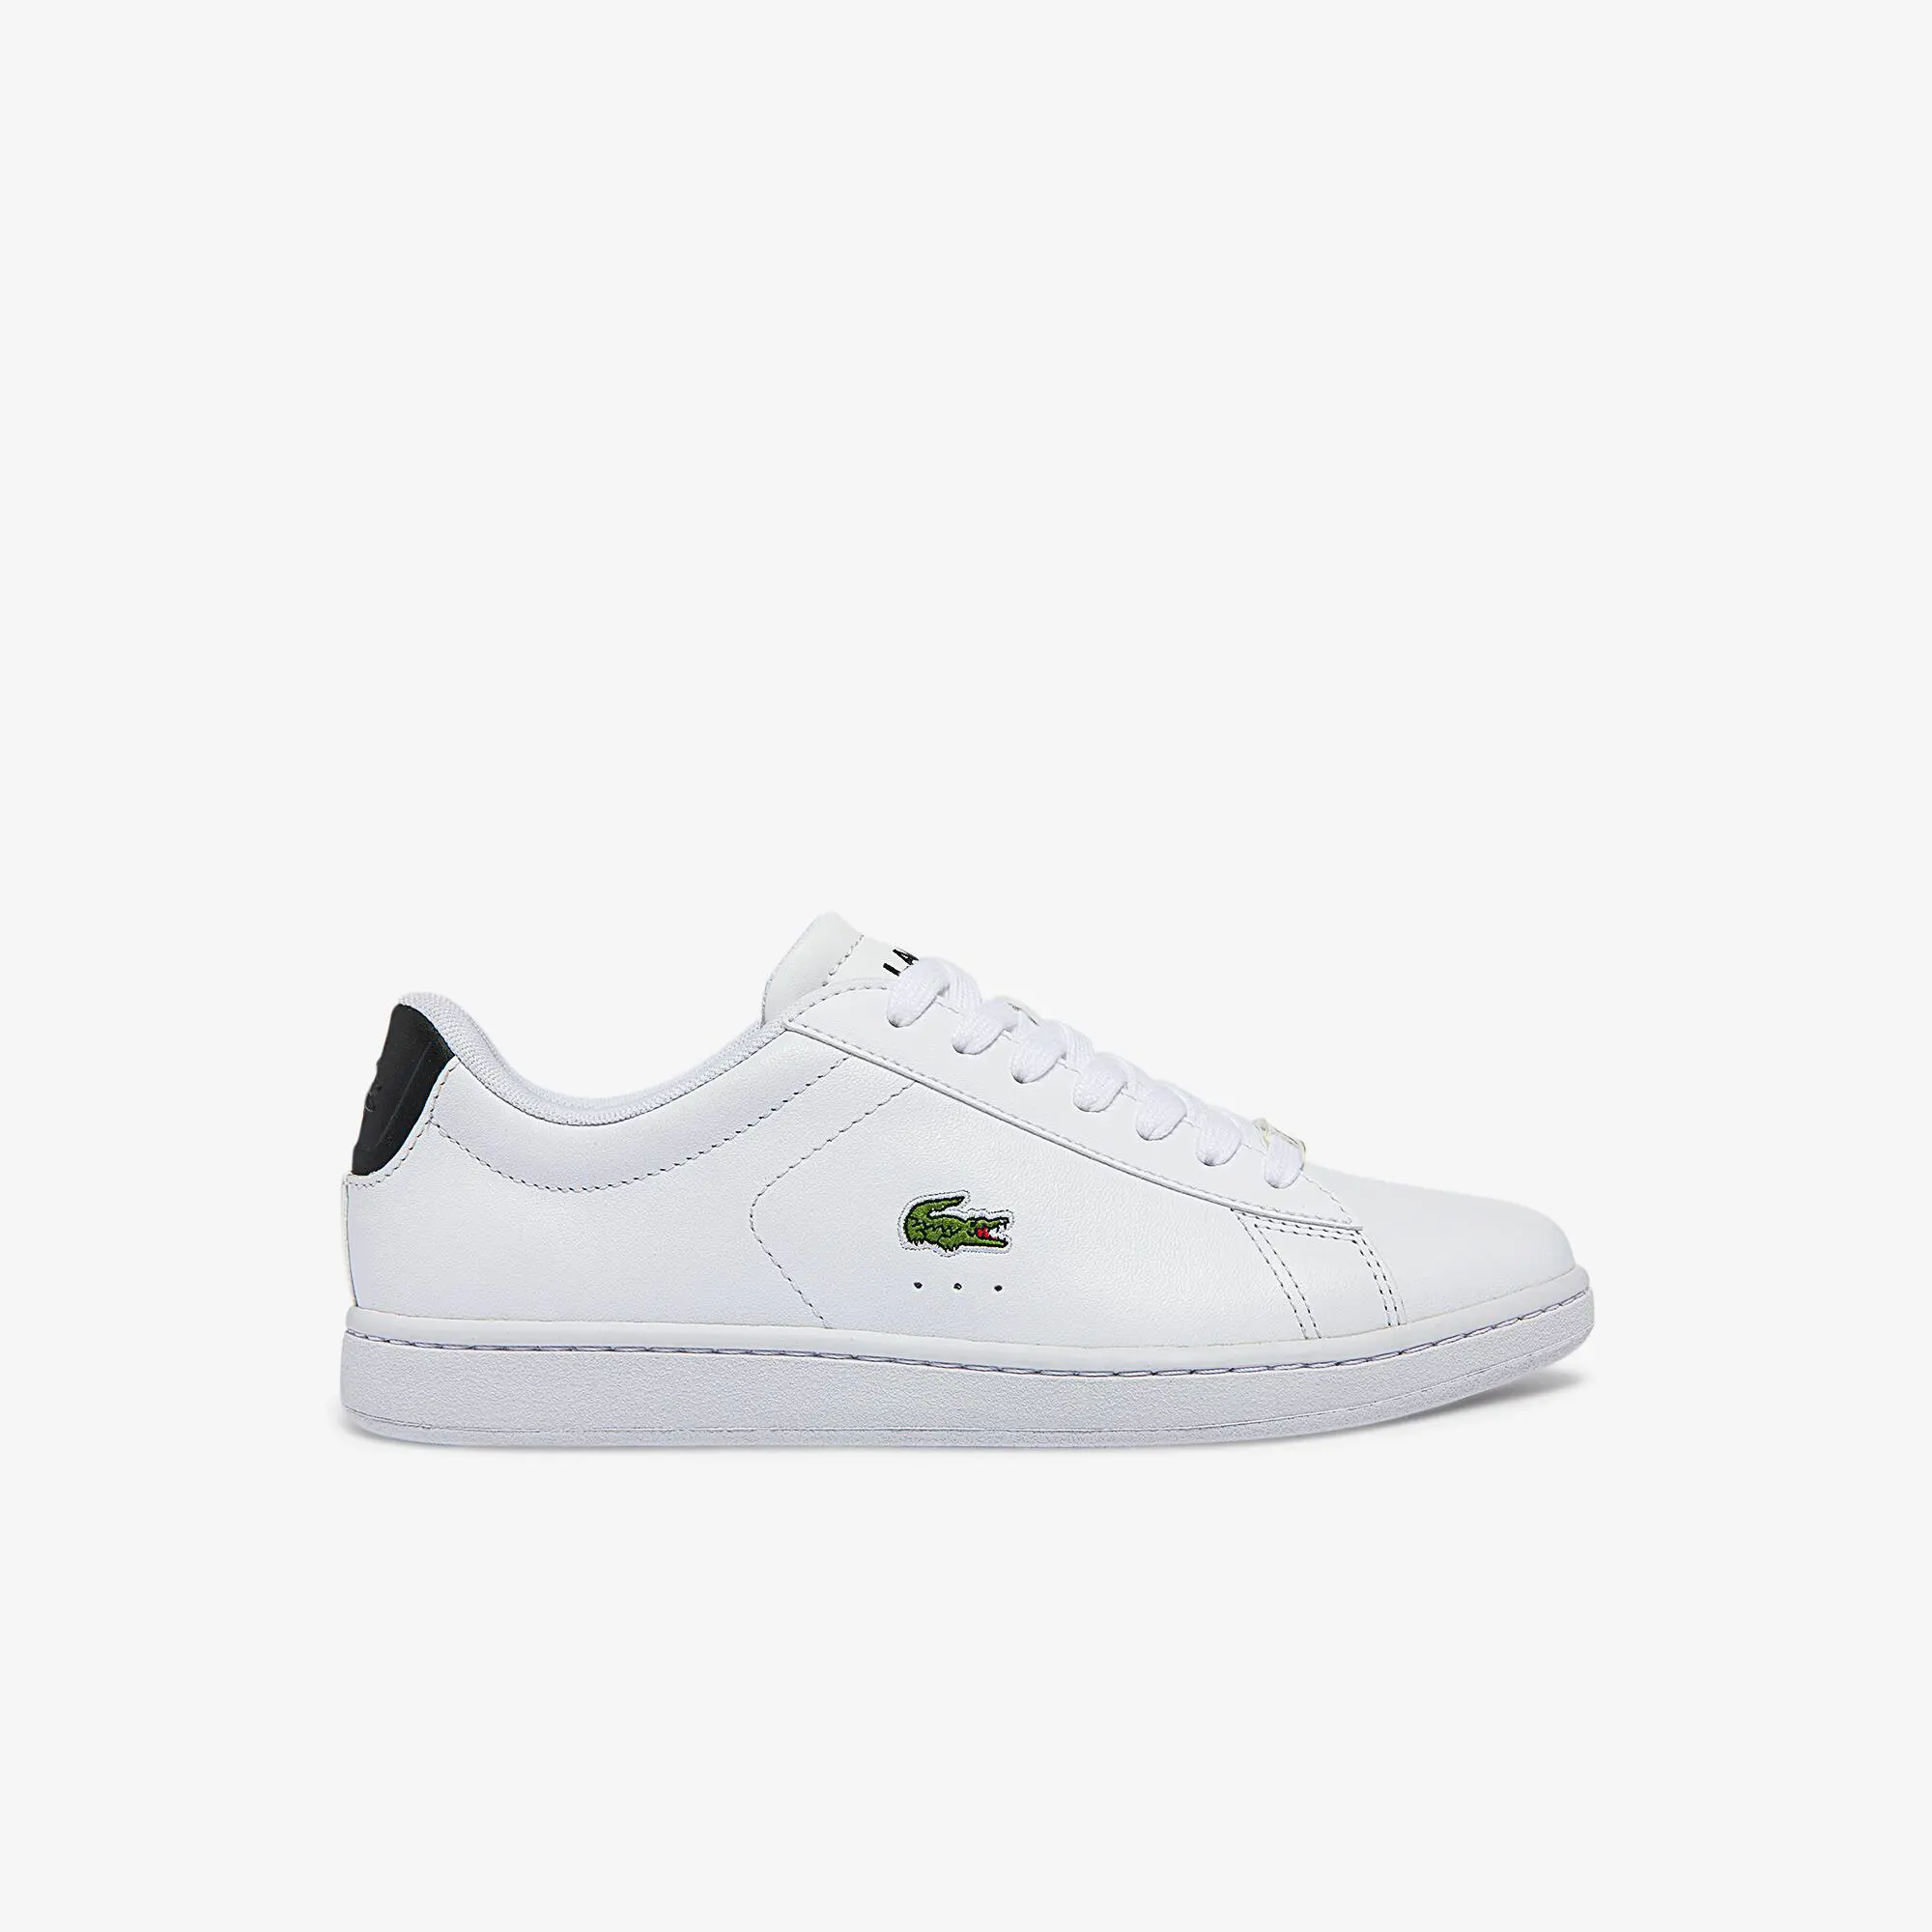 Lacoste Women's Carnaby Evo Leather and Synthetic Sneakers. 1